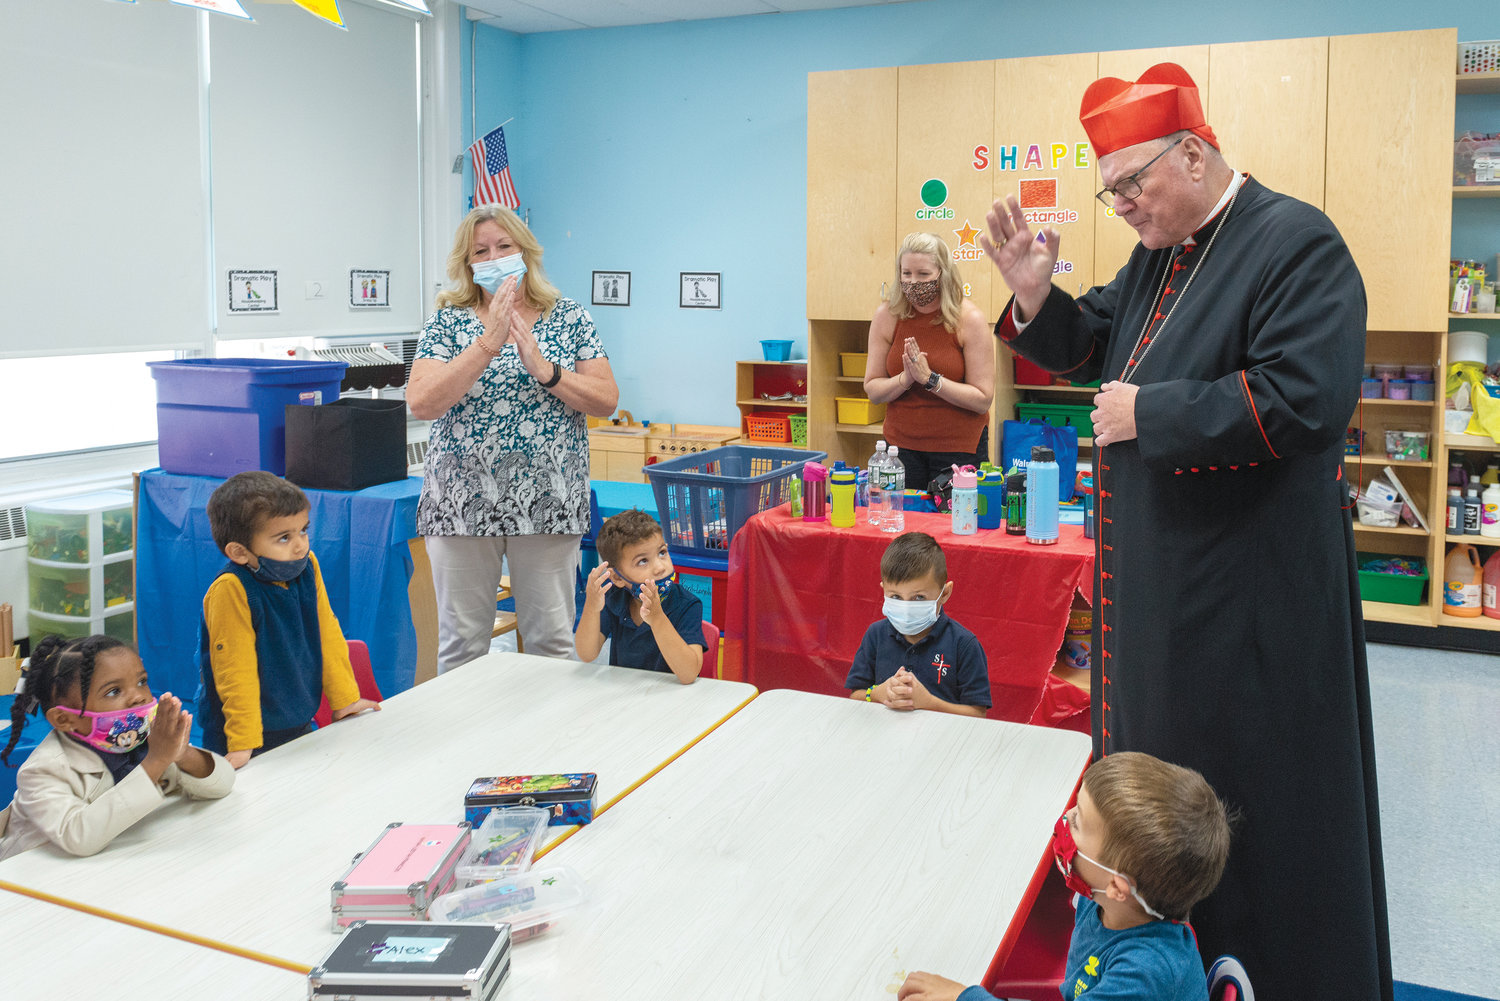 The cardinal visits with young students and staff in a classroom.